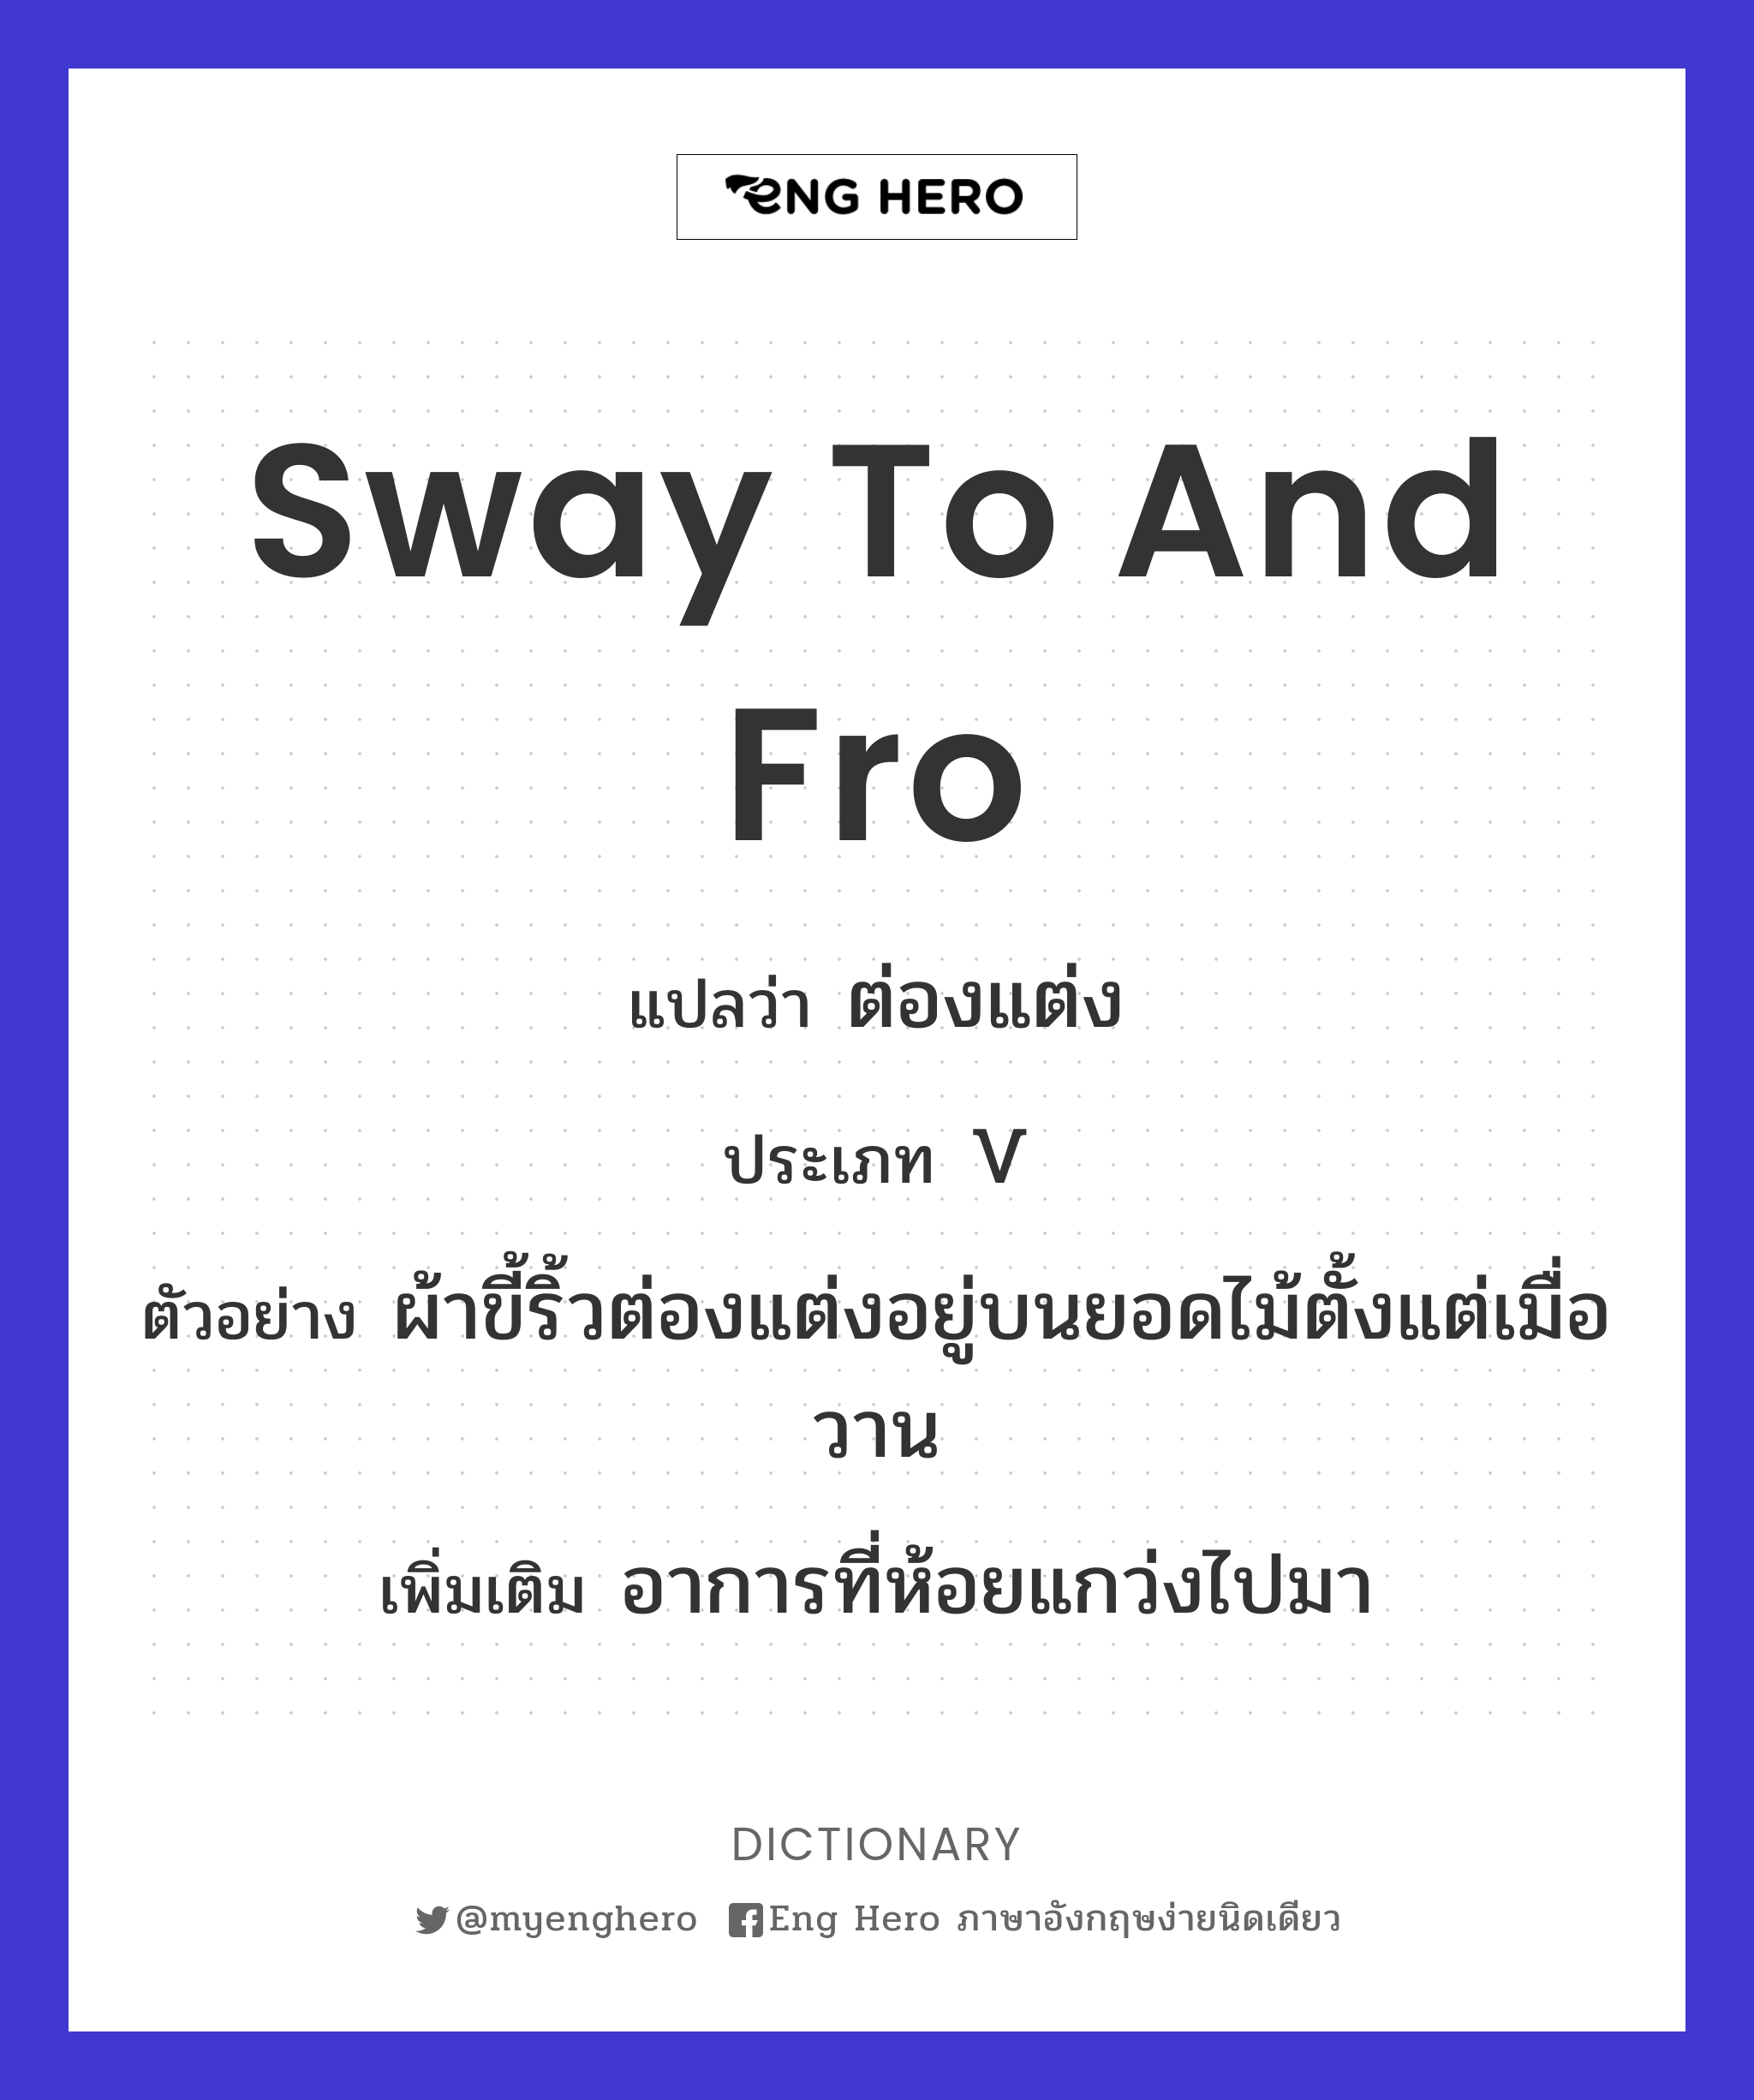 sway to and fro